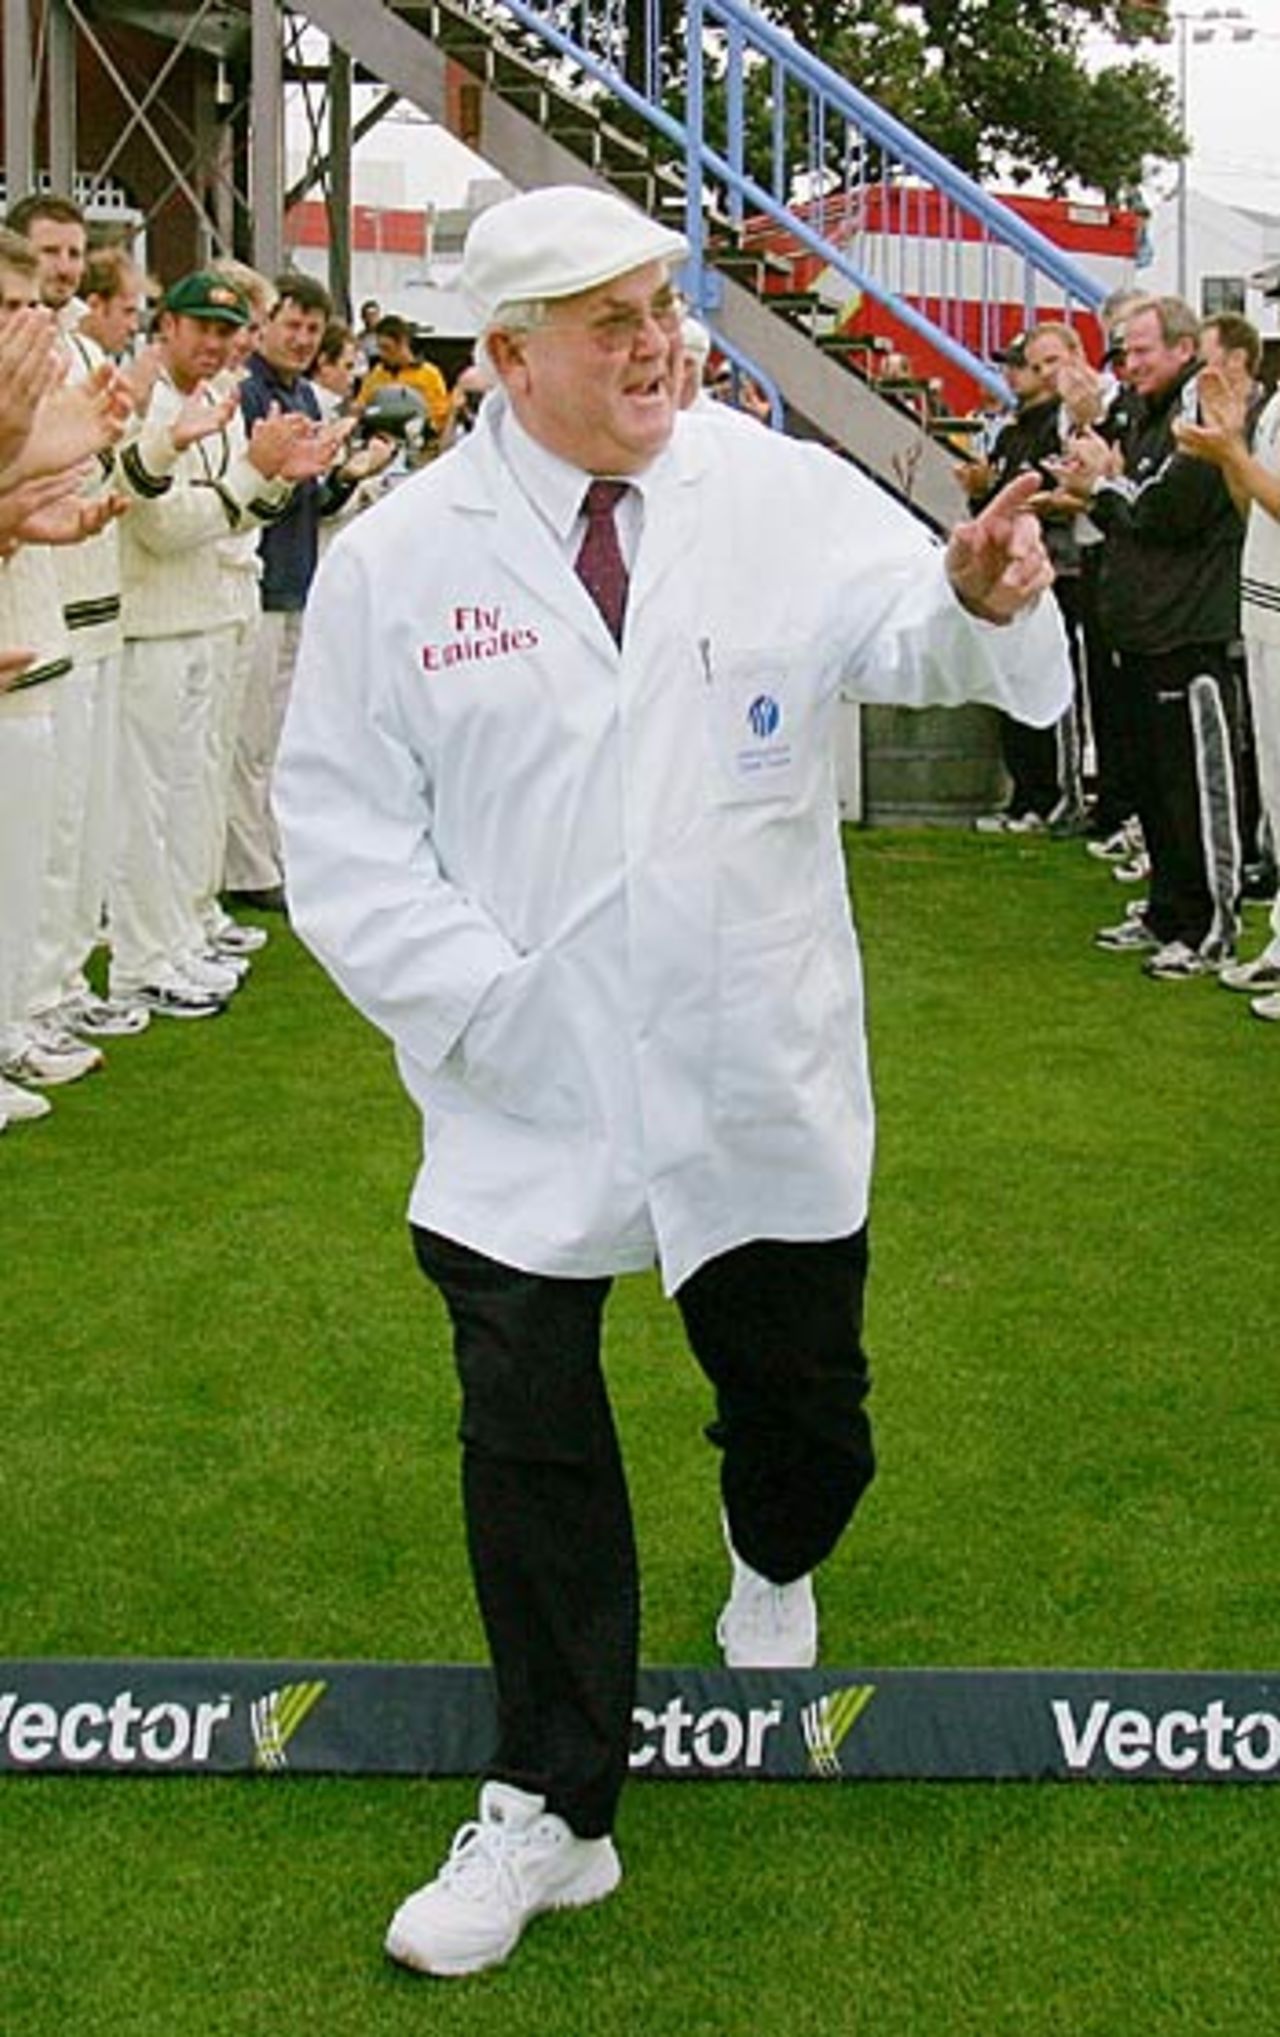 David Shepherd takes the field to a guard of honour, New Zealand v Australia, 2nd Test, Wellington, March 2005